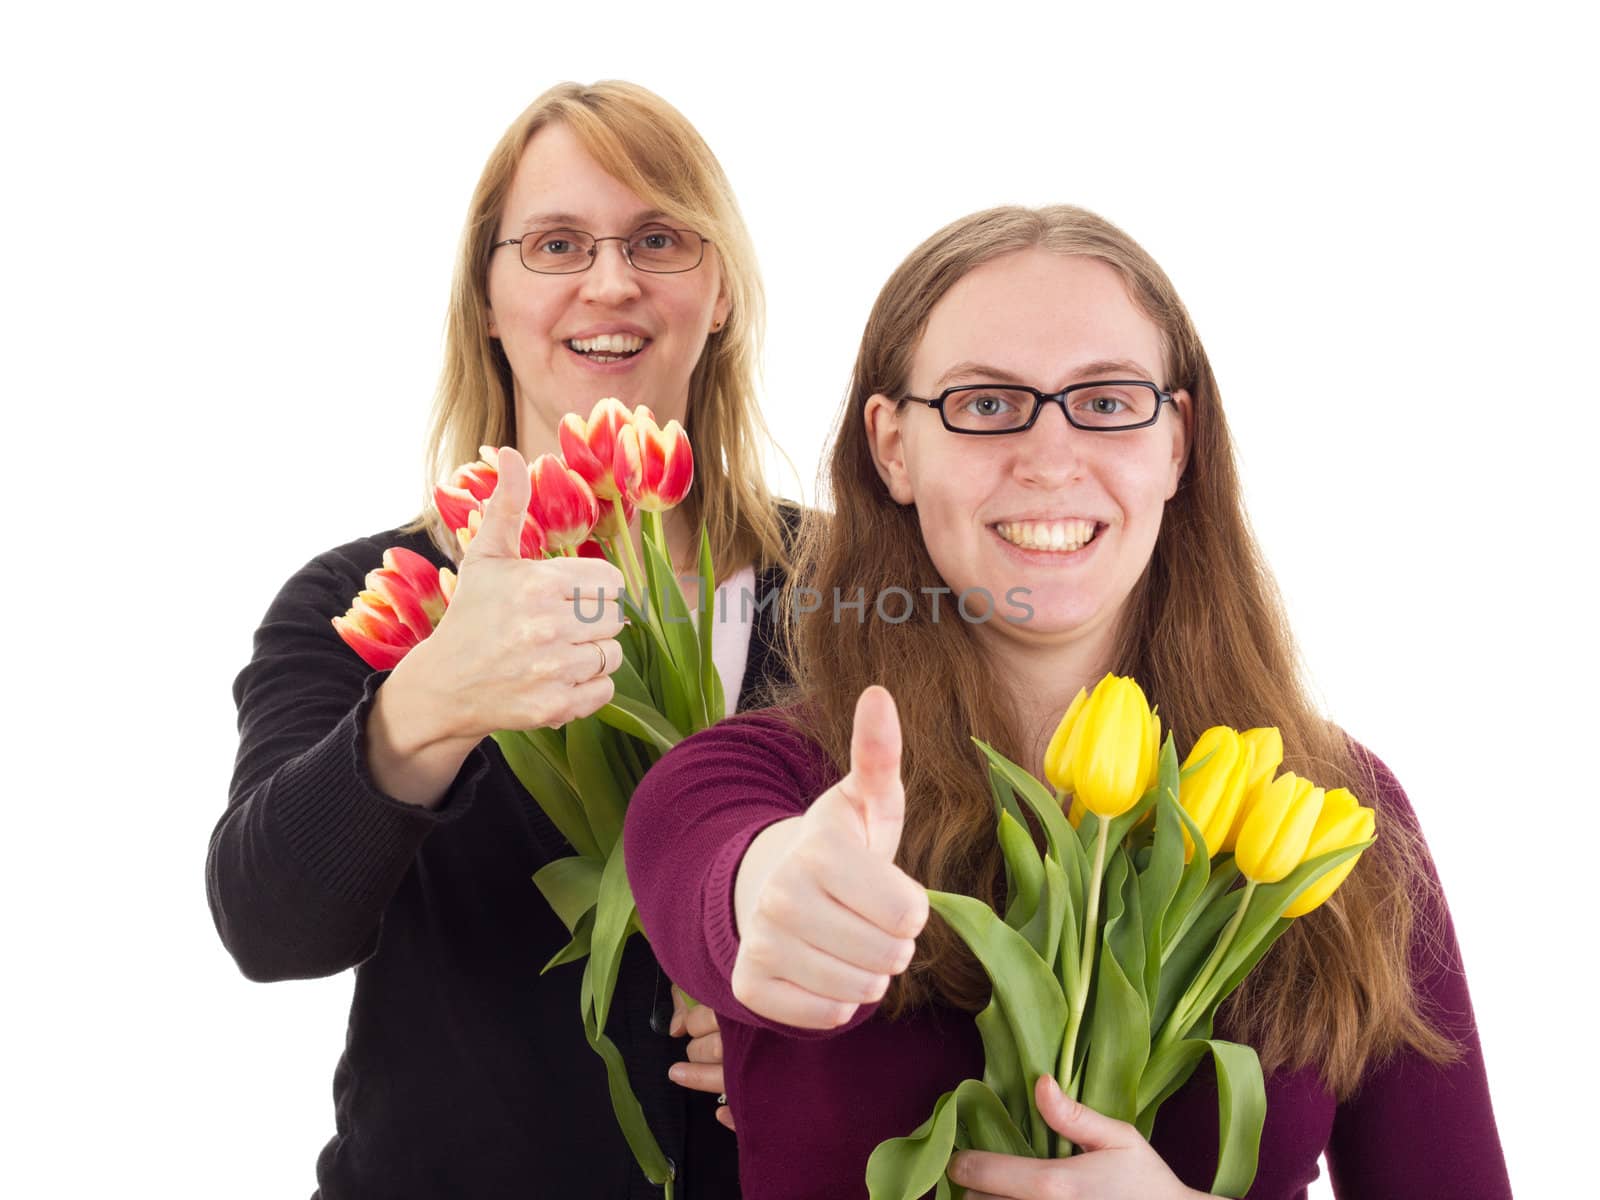 Women with tulips